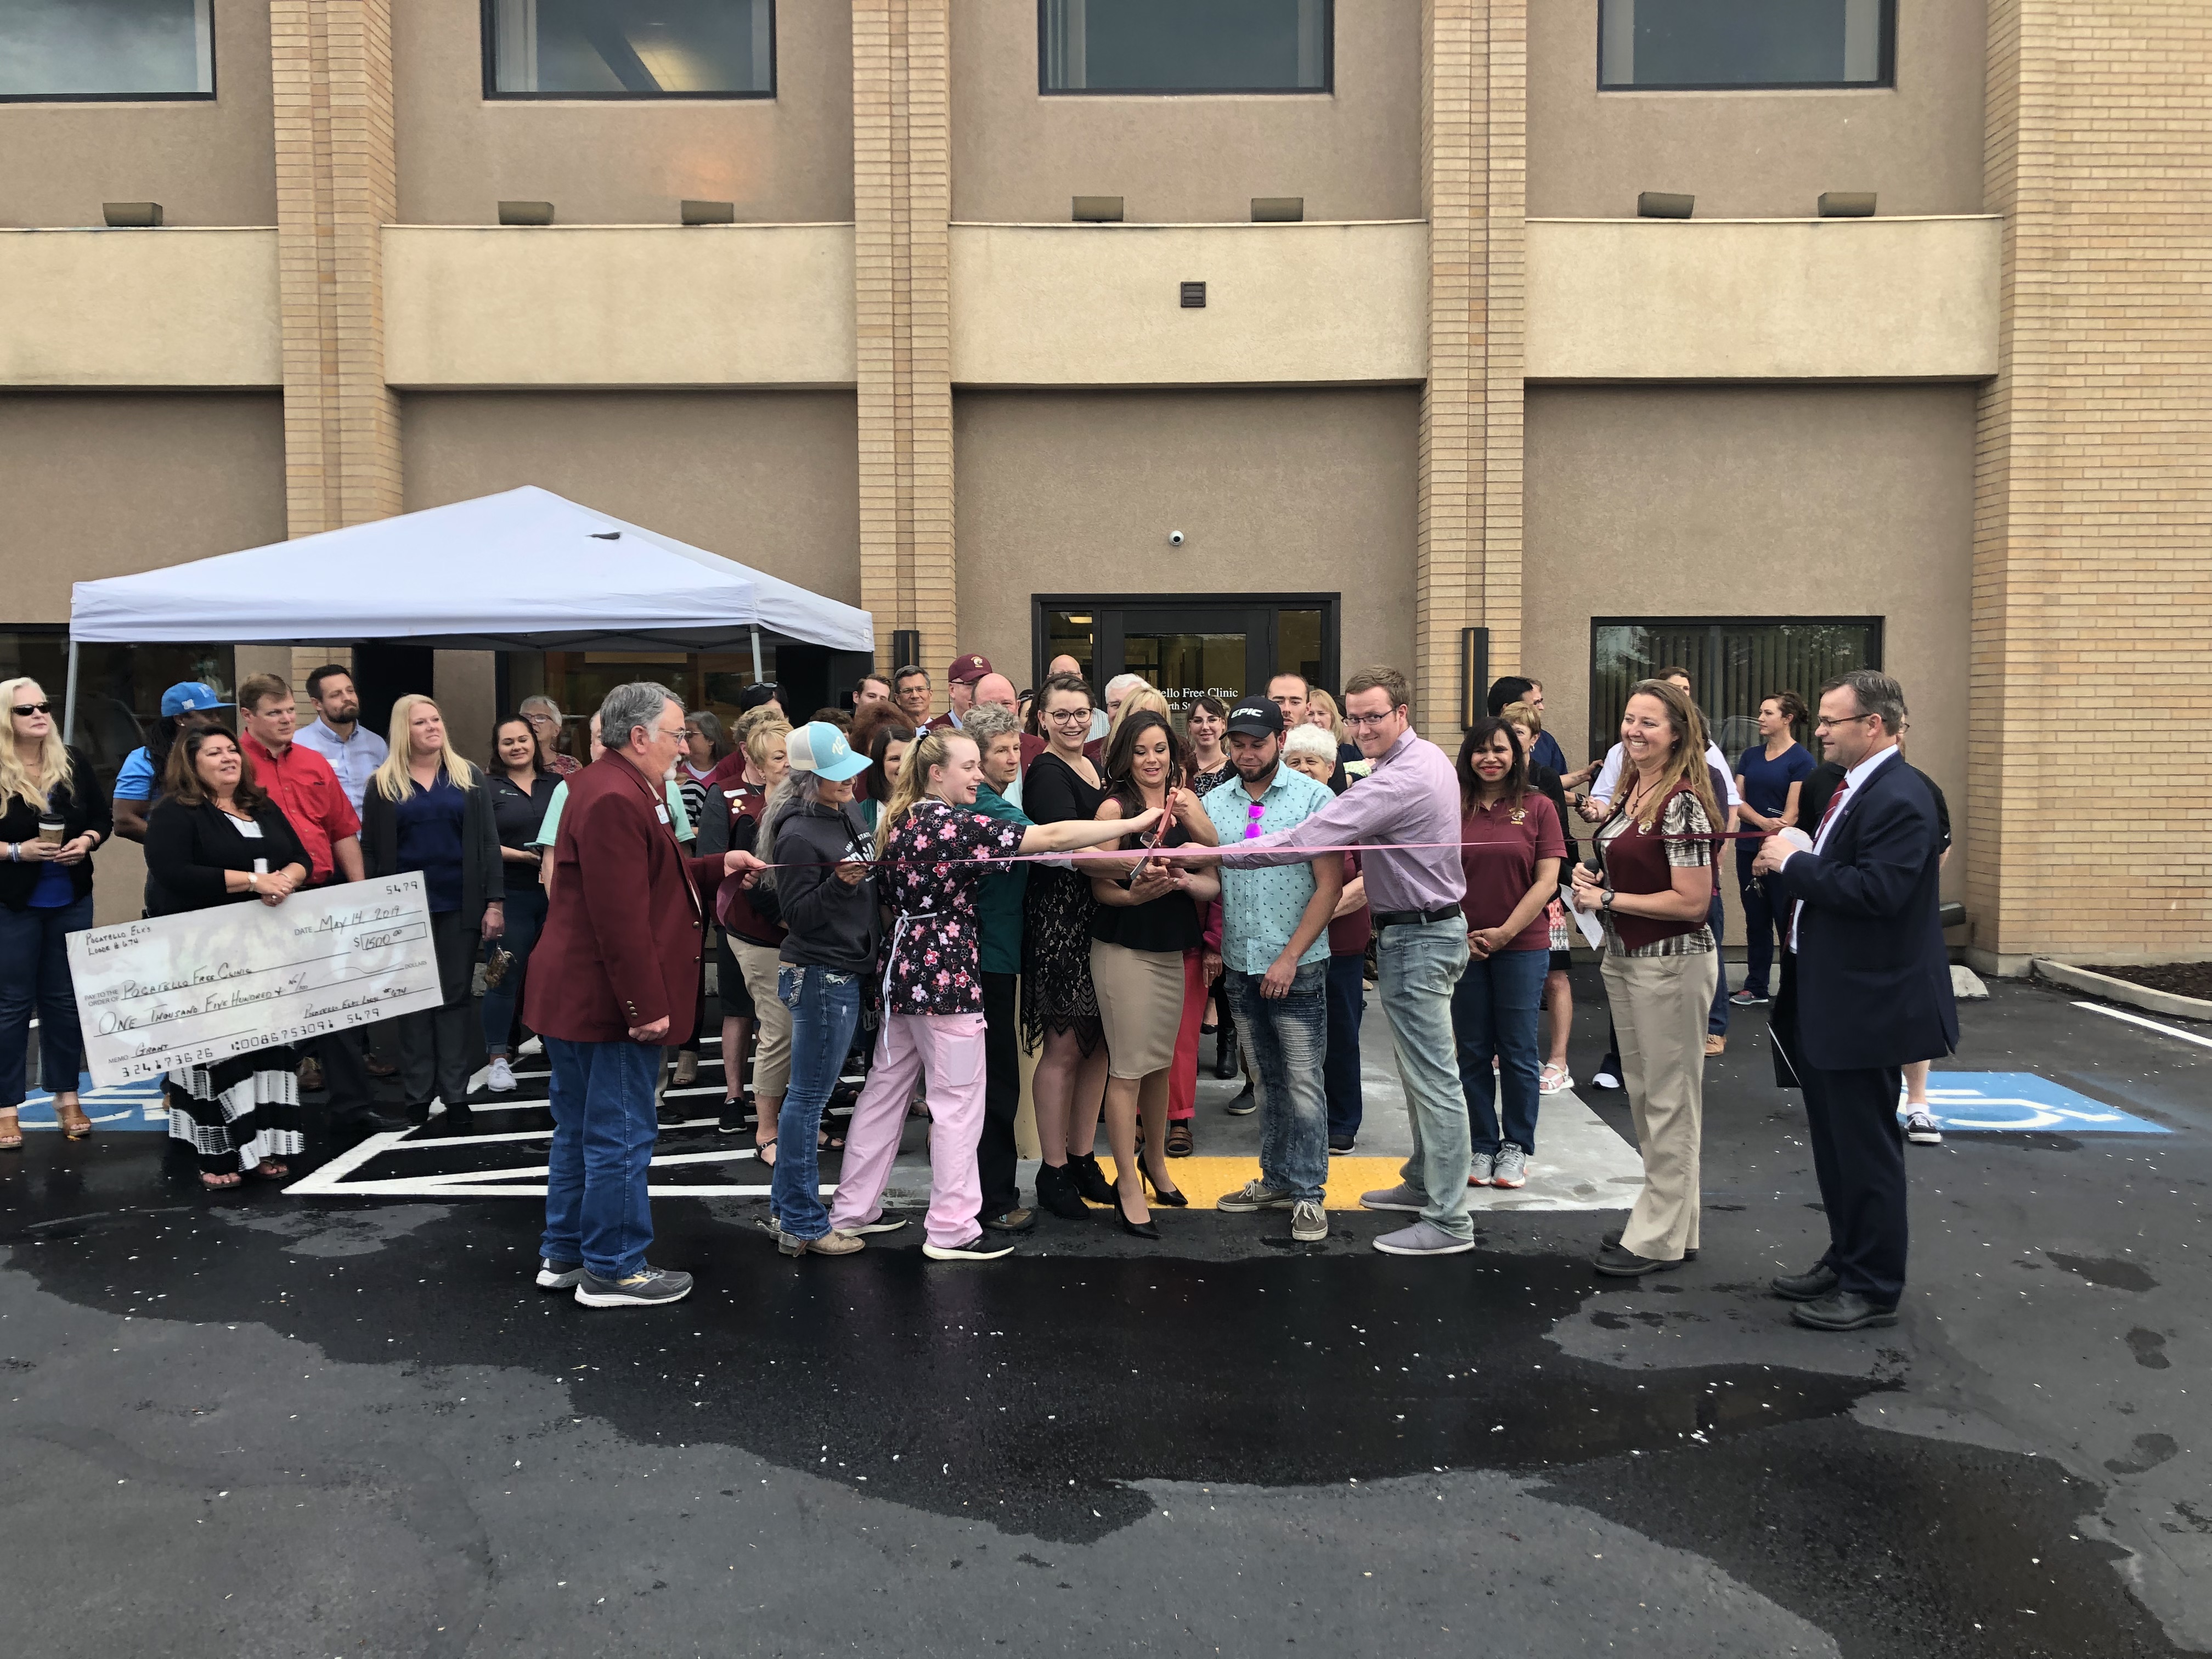 Pocatello Chubbuck Chamber Chiefs, ISU students and faculty, and community members cut the ribbon at the May 2019 Pocatello free clinic ribbon cutting